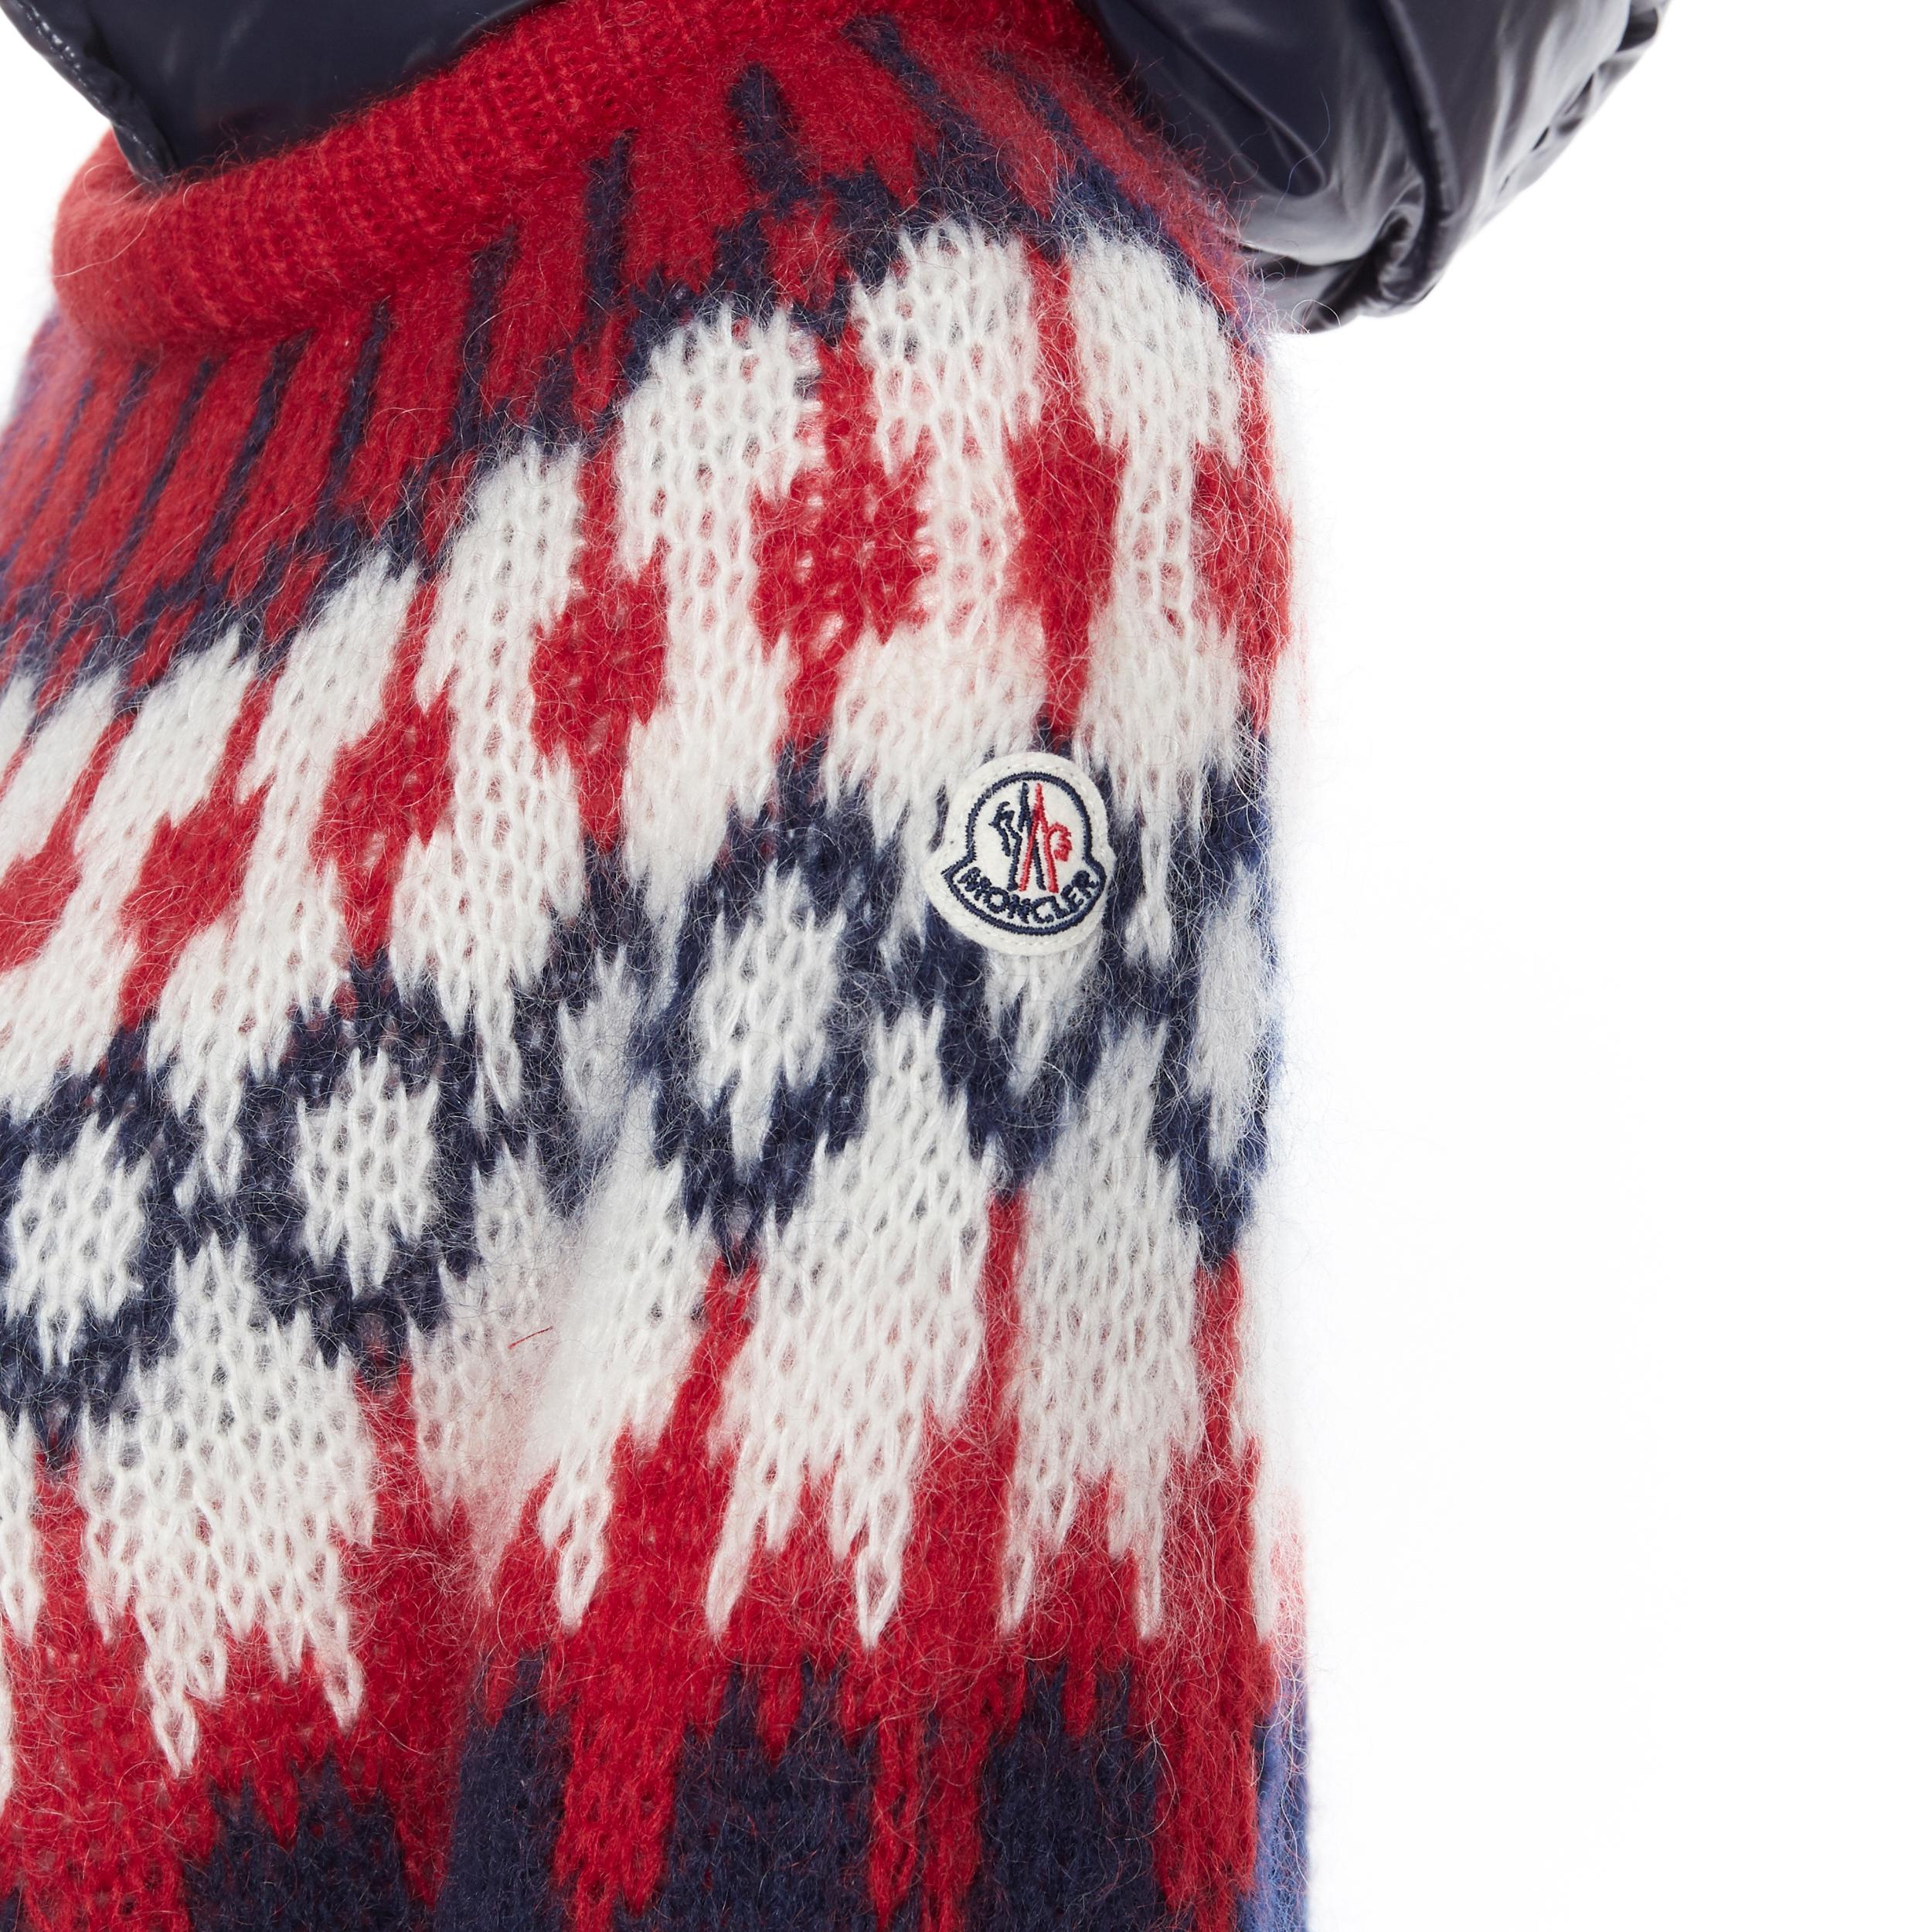 MONCLER navy white red fairisle knit detachable down puffer hood sweater XS 
Brand: Moncler
Model Name / Style: Fairisle sweater
Material: Mohair wool
Color: Blue, red
Pattern: Abstract
Extra Detail: Moncler logo at sleeve. Loose knit. Detachable